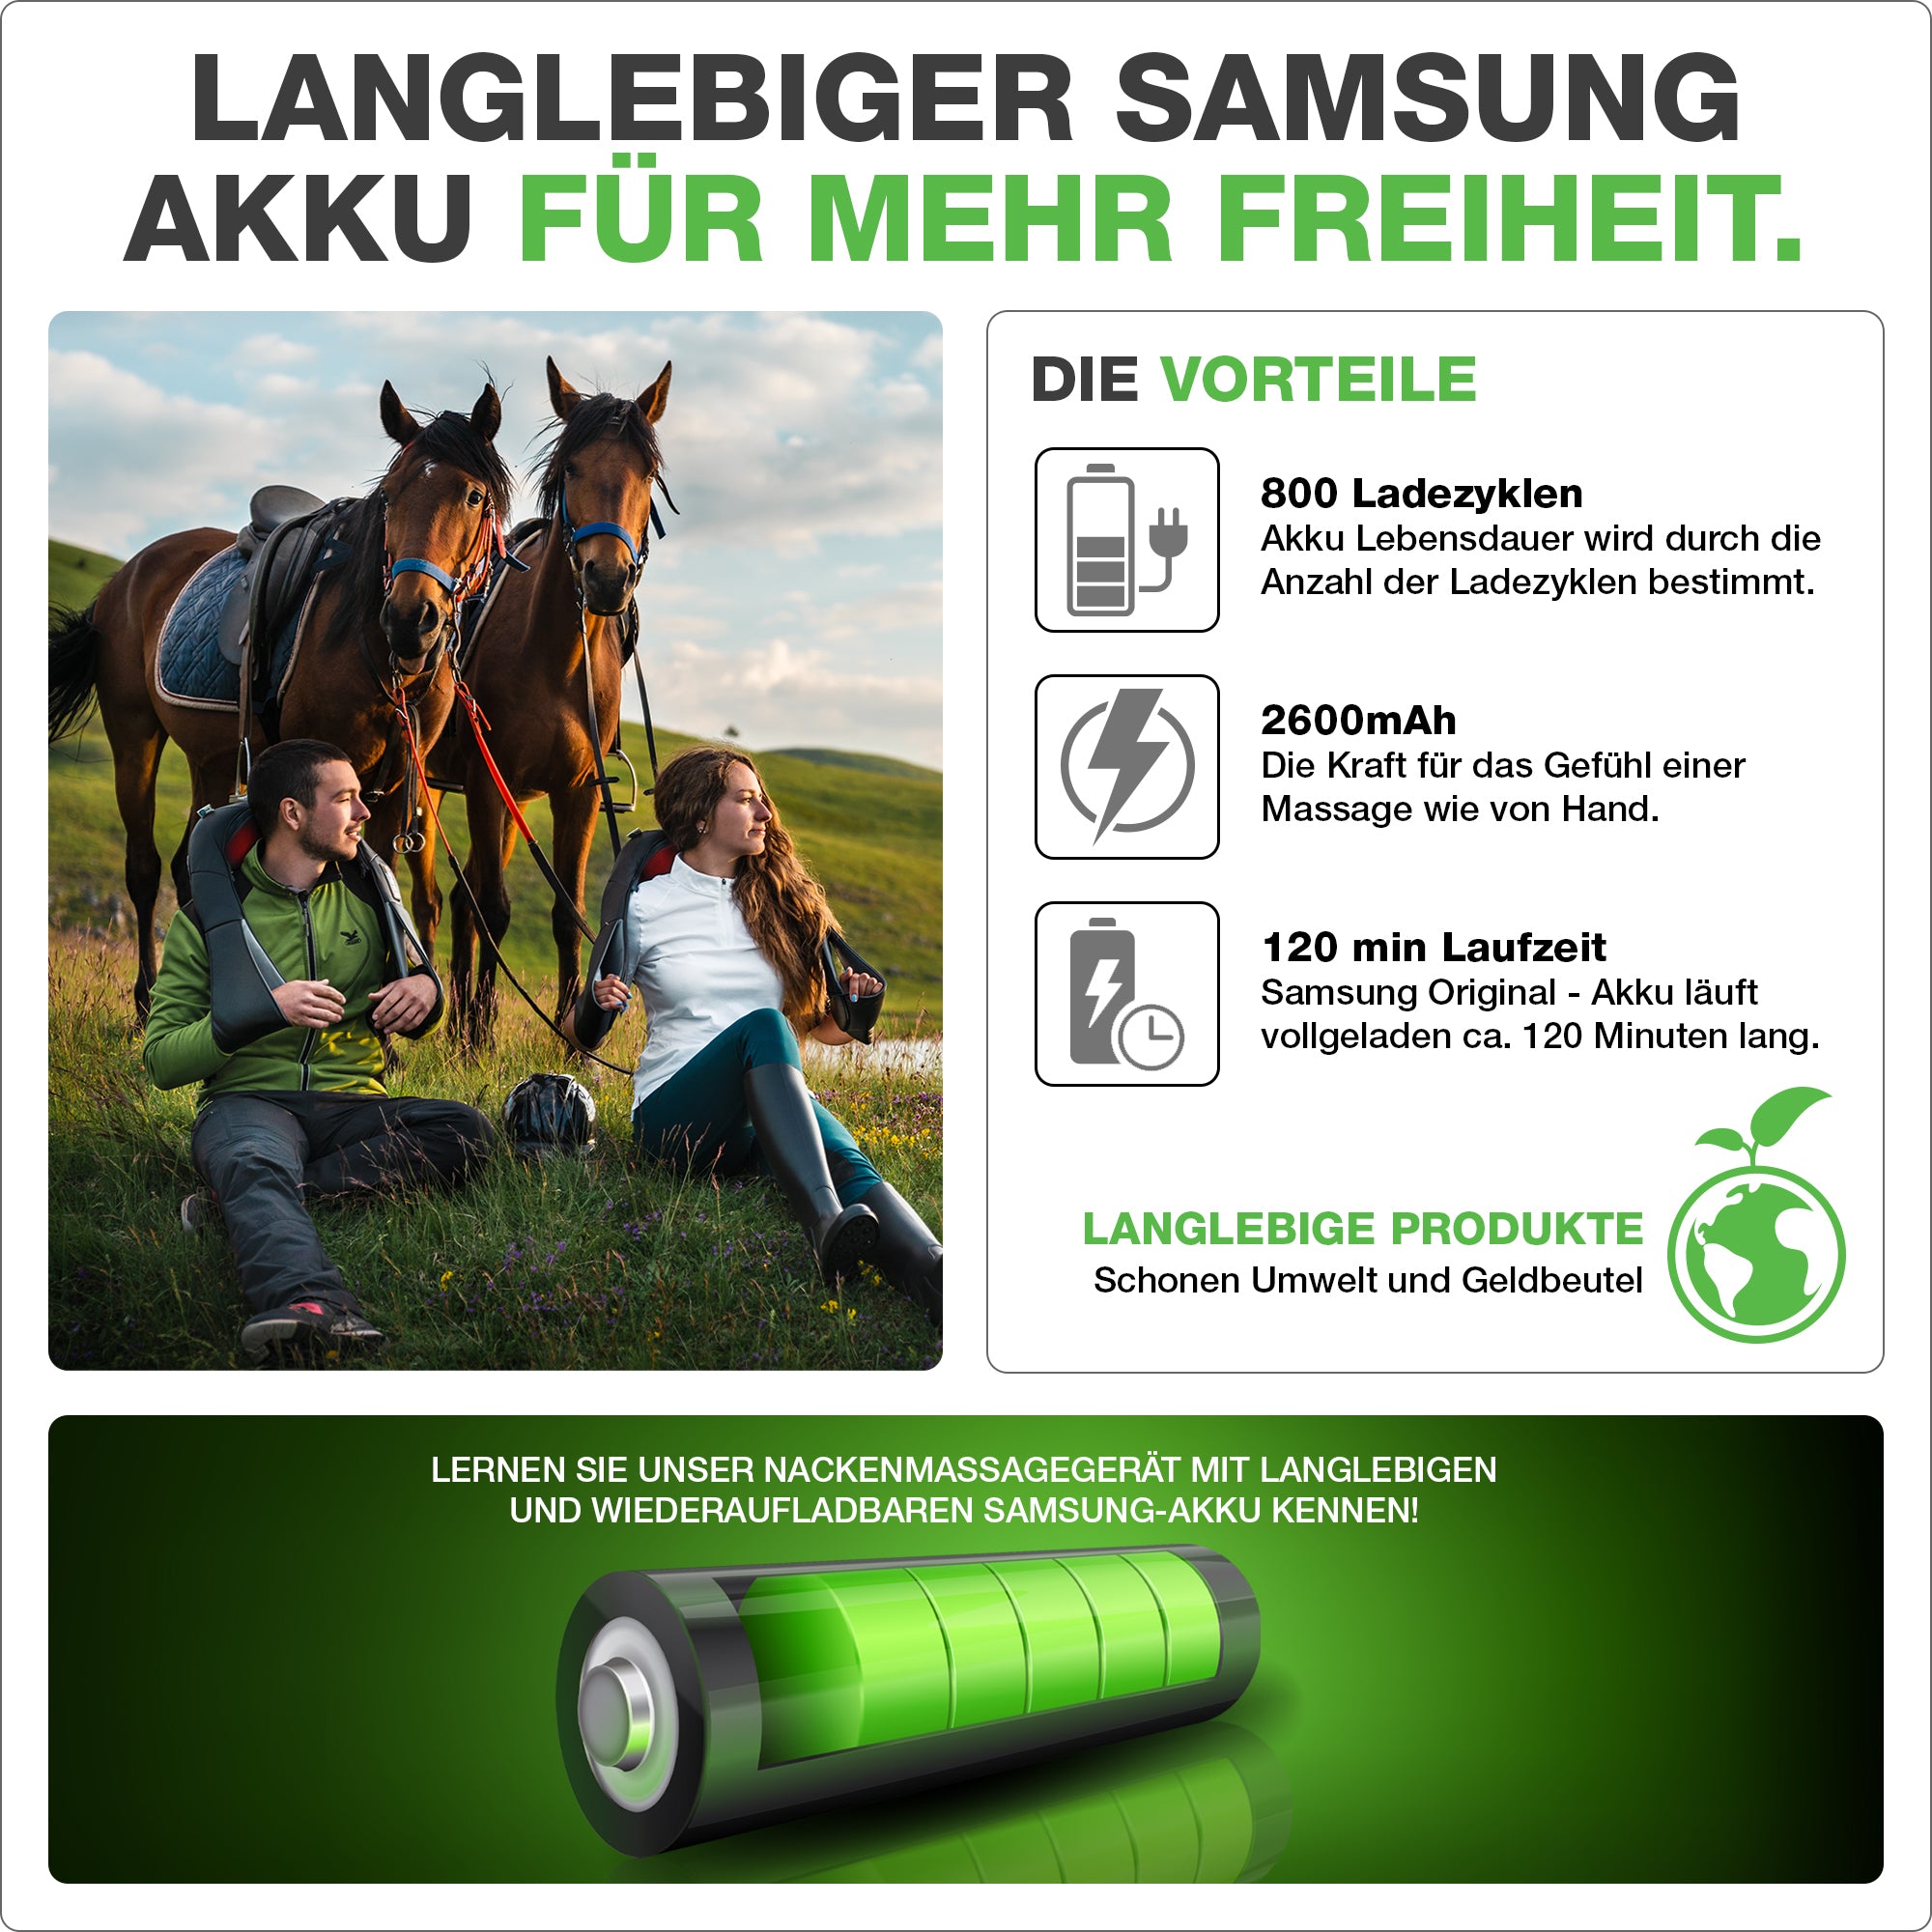 Durable Samsung battery with 800 charging cycles